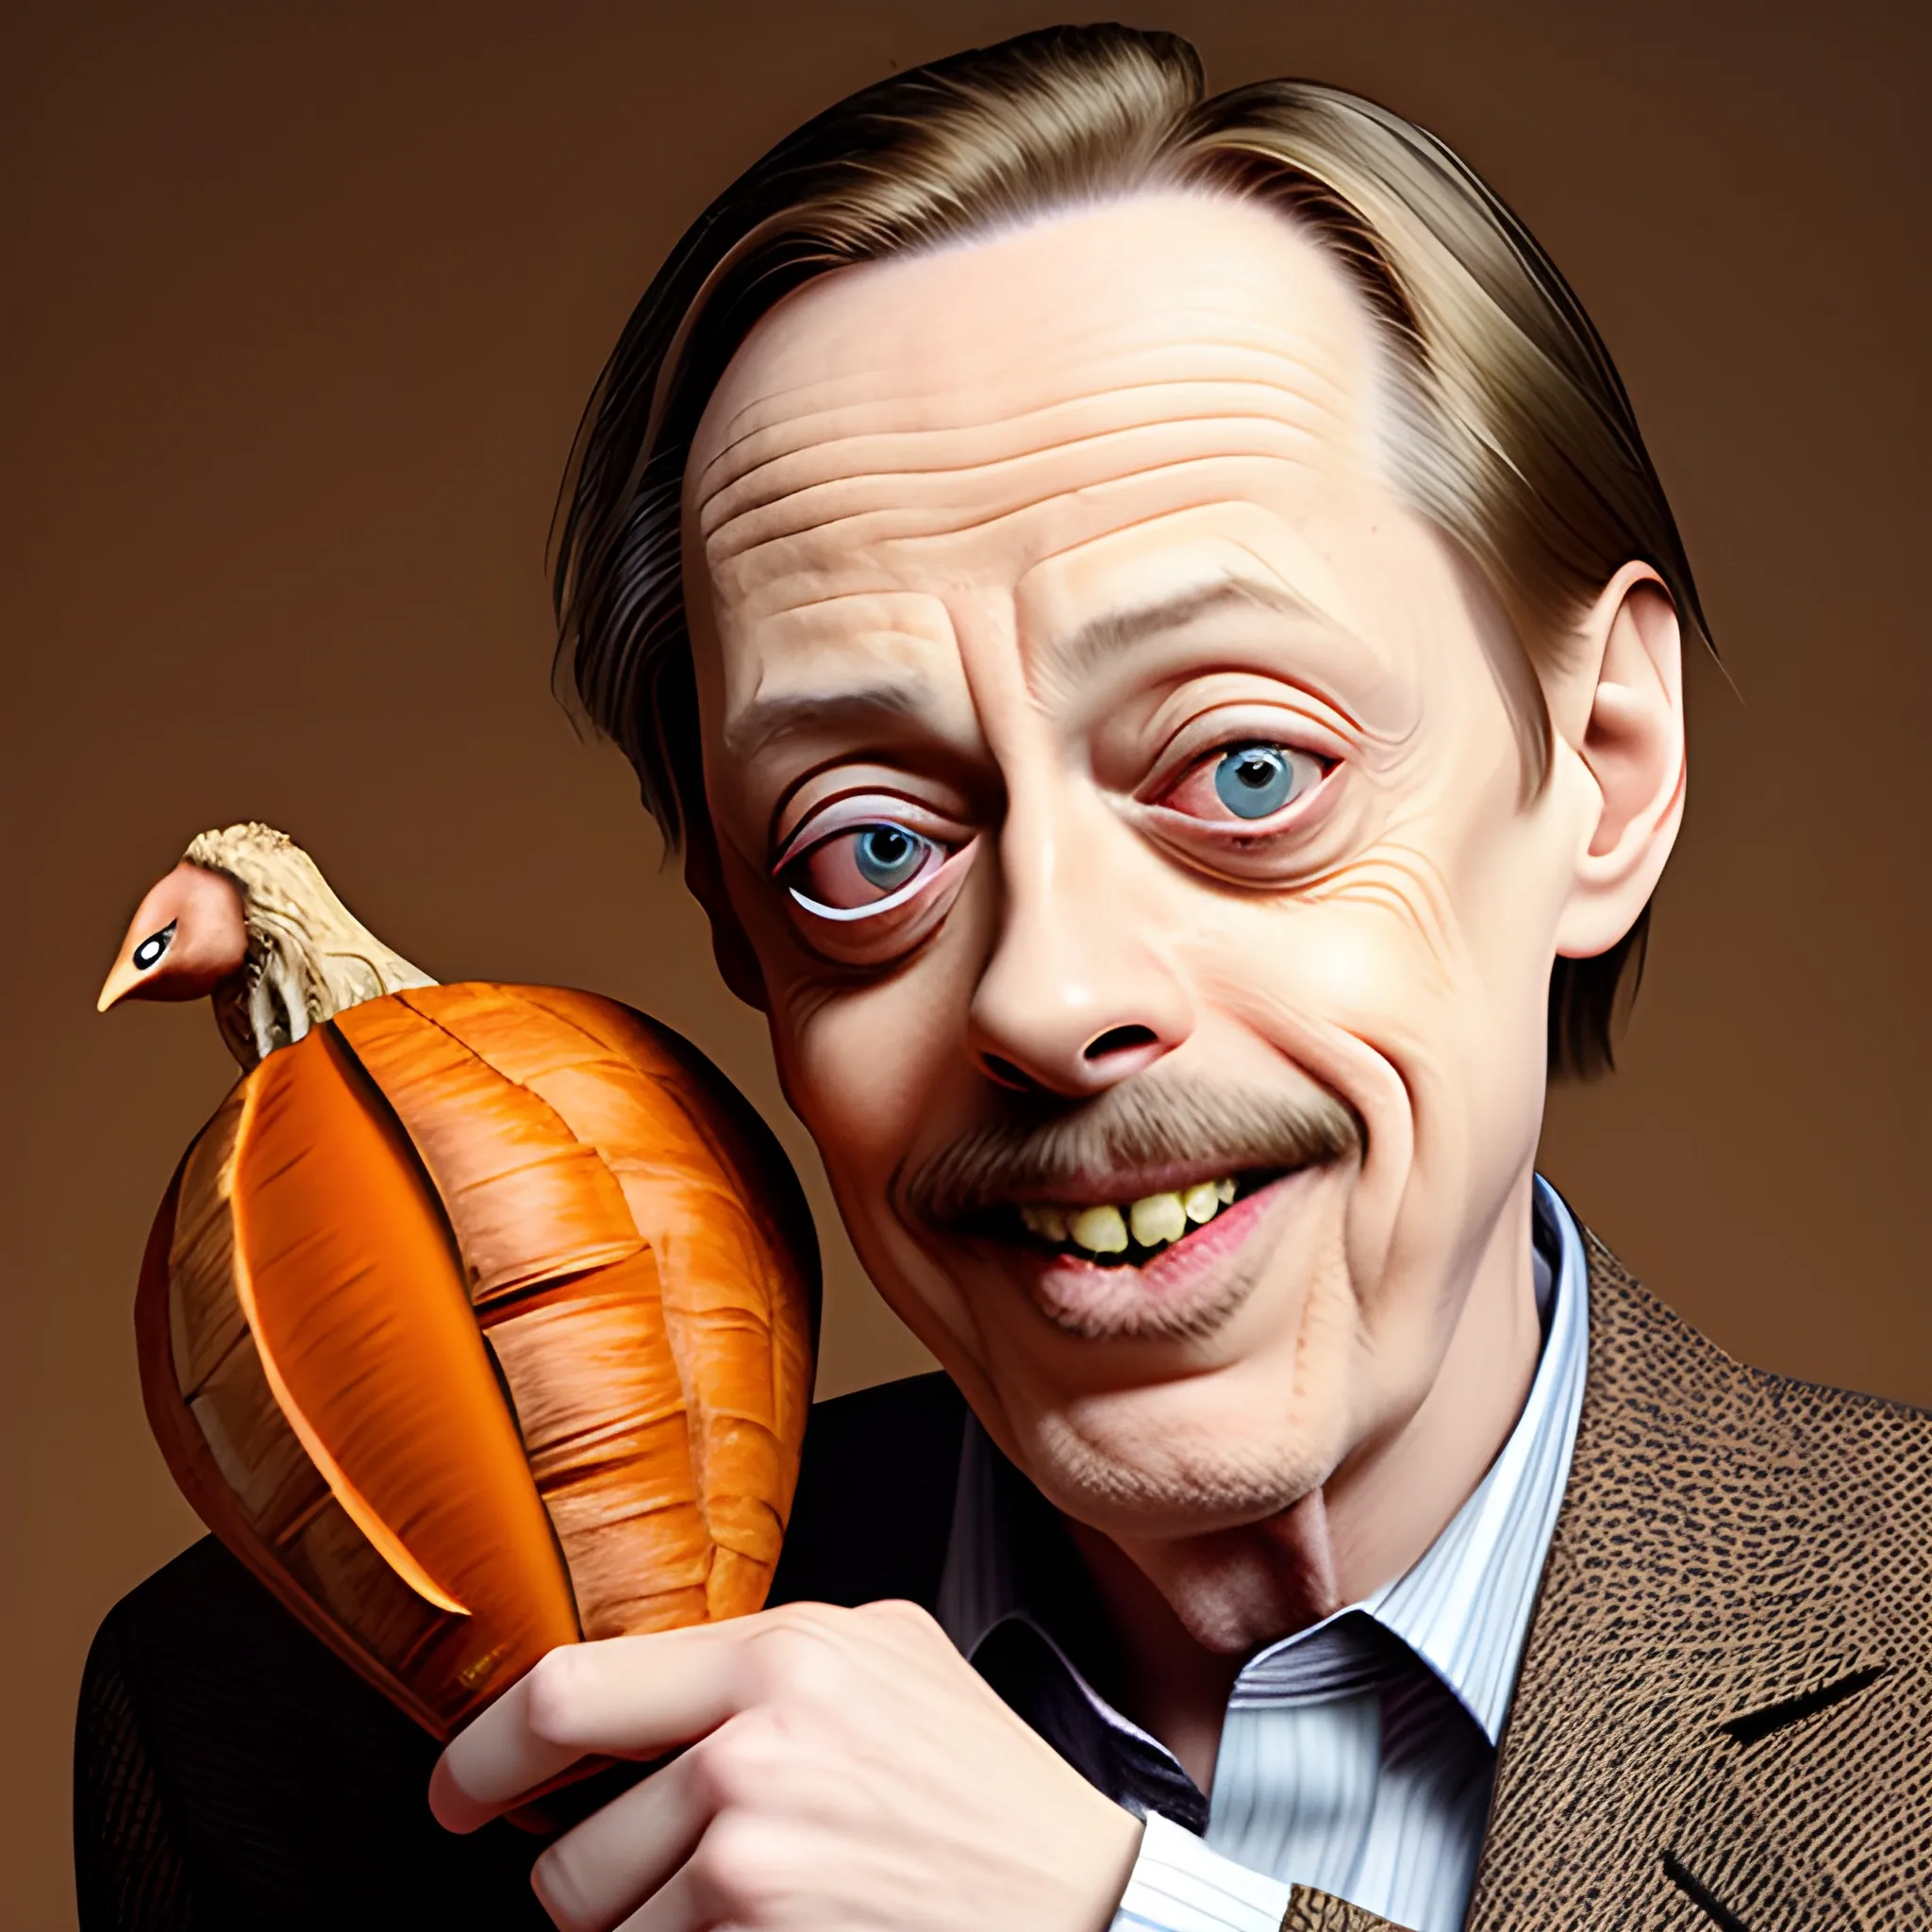 Steve Buscemi is holding a turkey and a yam, Steve Buscemi is laughing